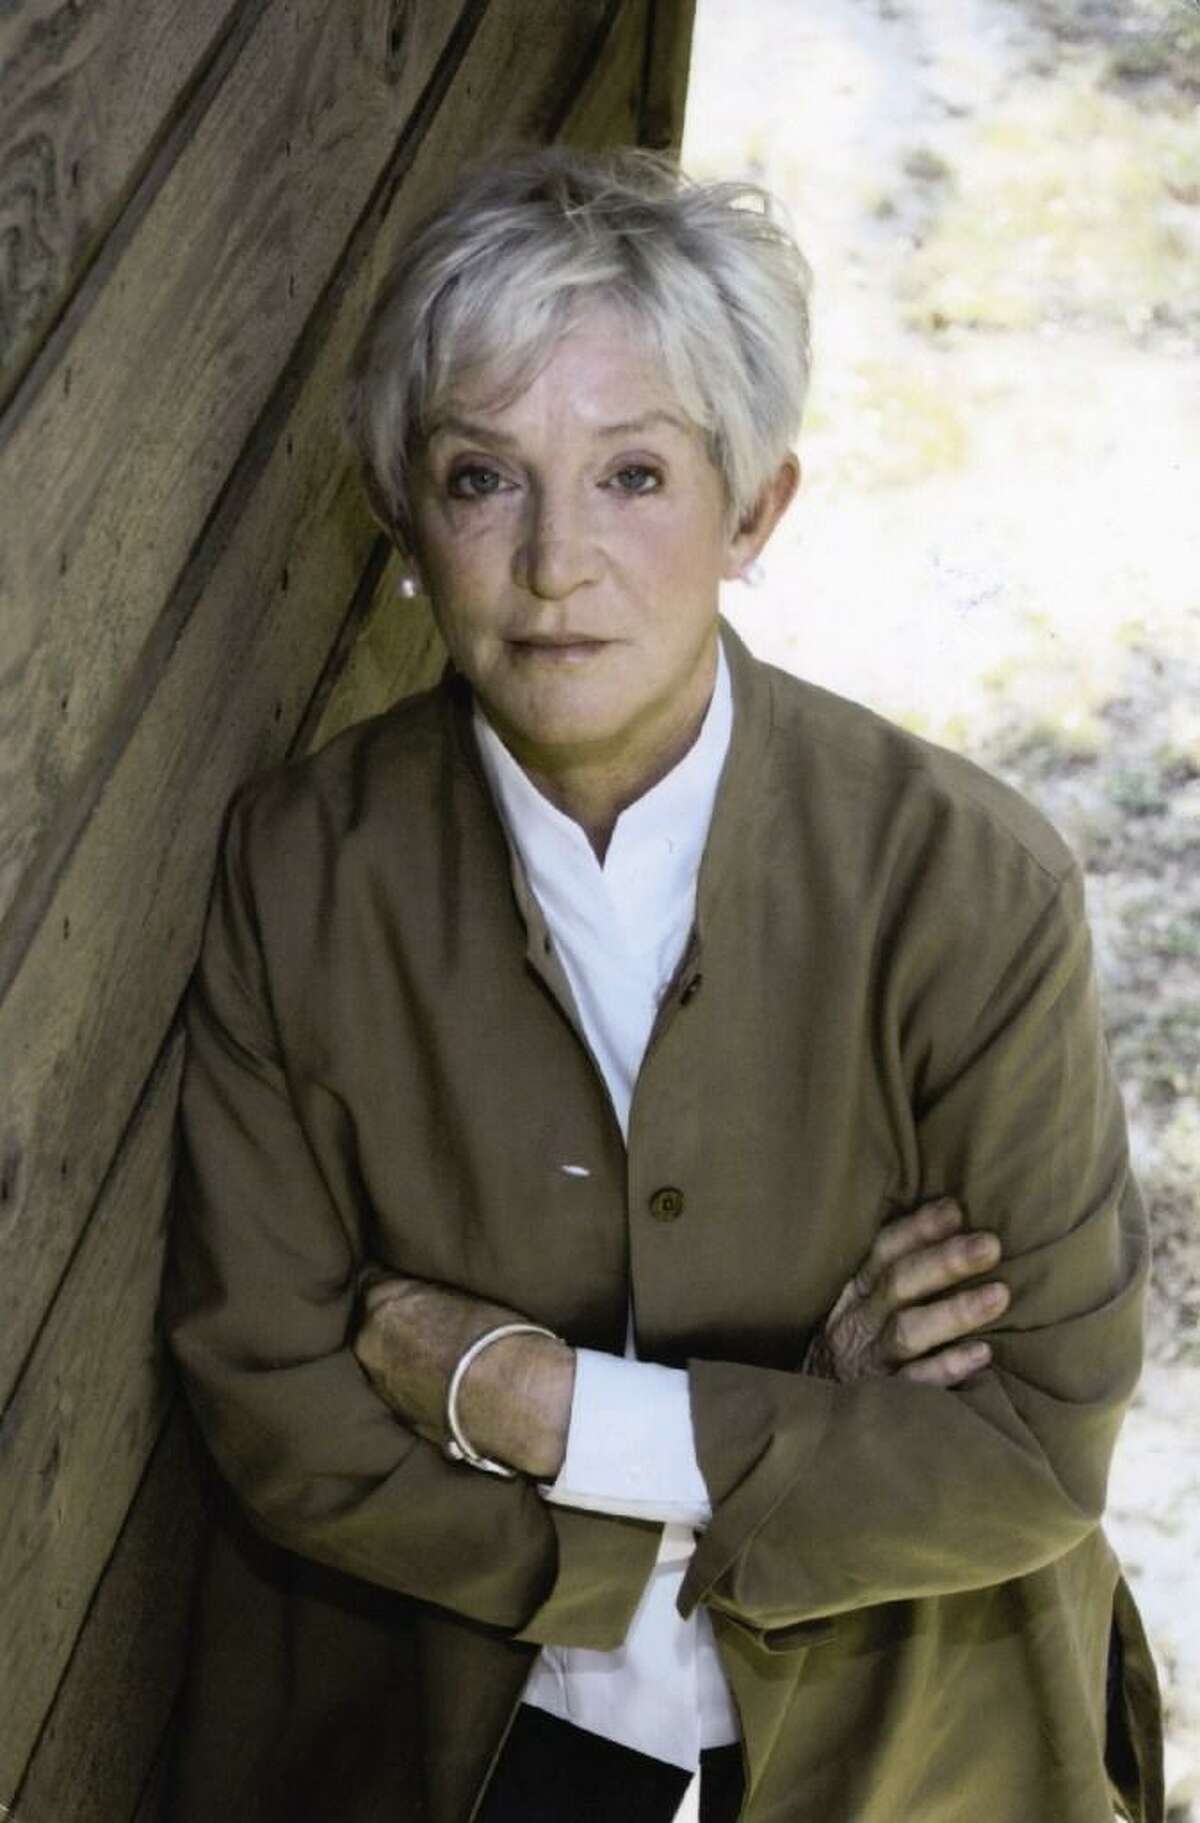 Paulette Jiles is known for her enduring, human Western characters.